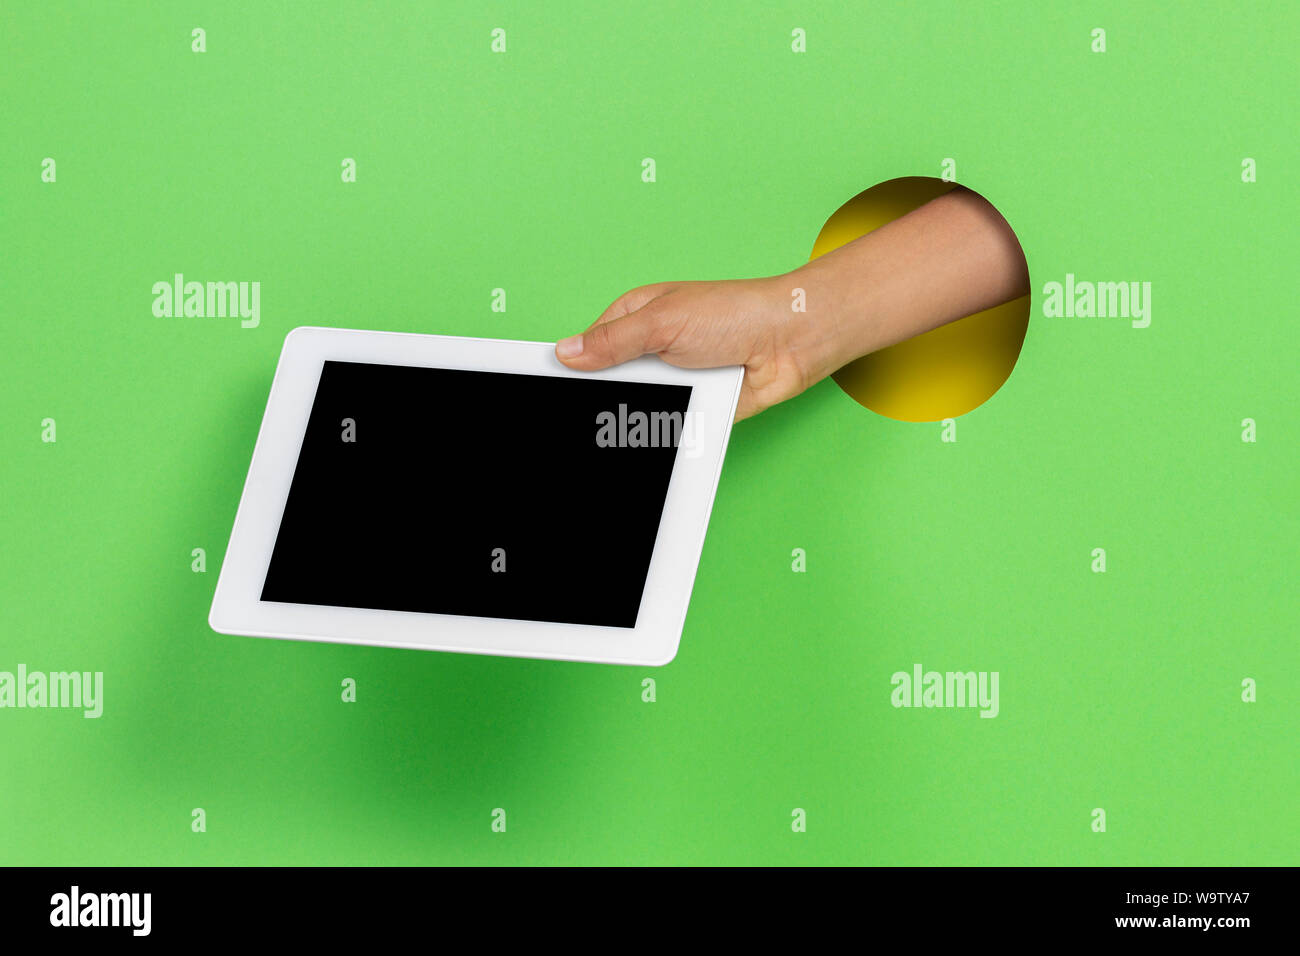 Kid holding tablet computer in hand through hole on light green background Stock Photo